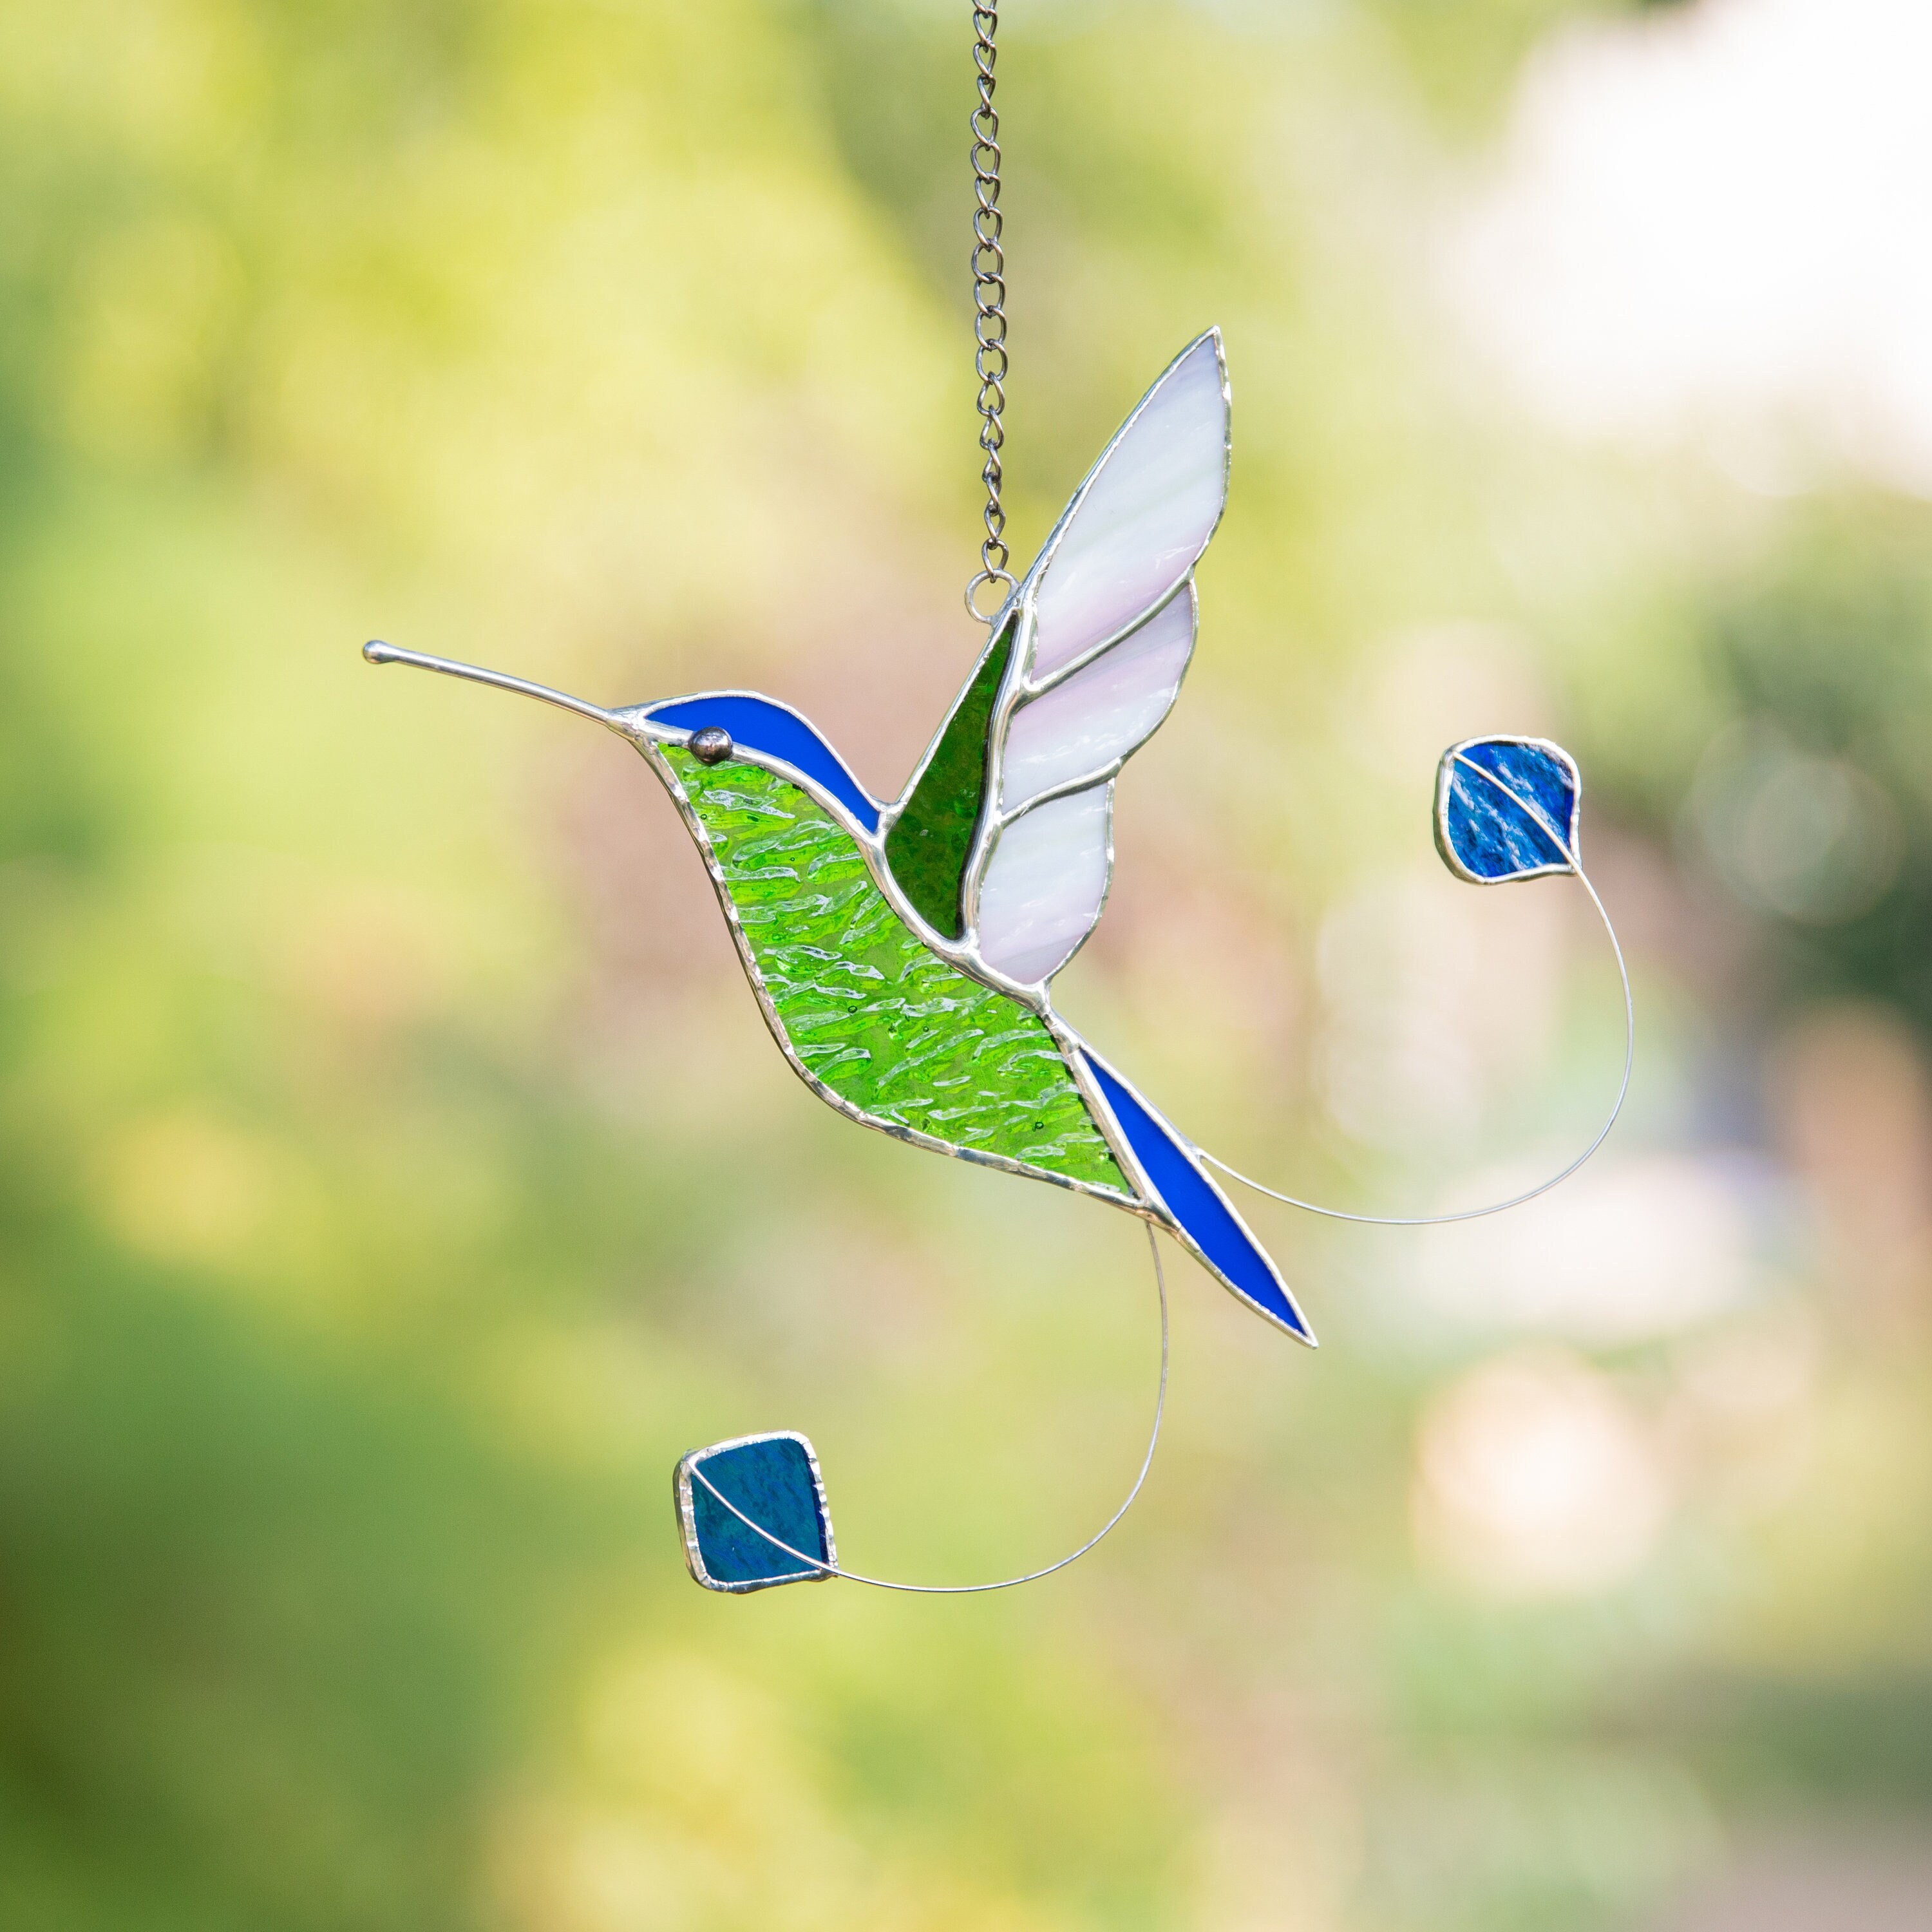 Metal Window Small Bird Decoration With Hook Stained Glass Ornament Memorial Handicrafts Gifts Shenrongtong Stained Glass Hummingbird Window Hangings Decor 